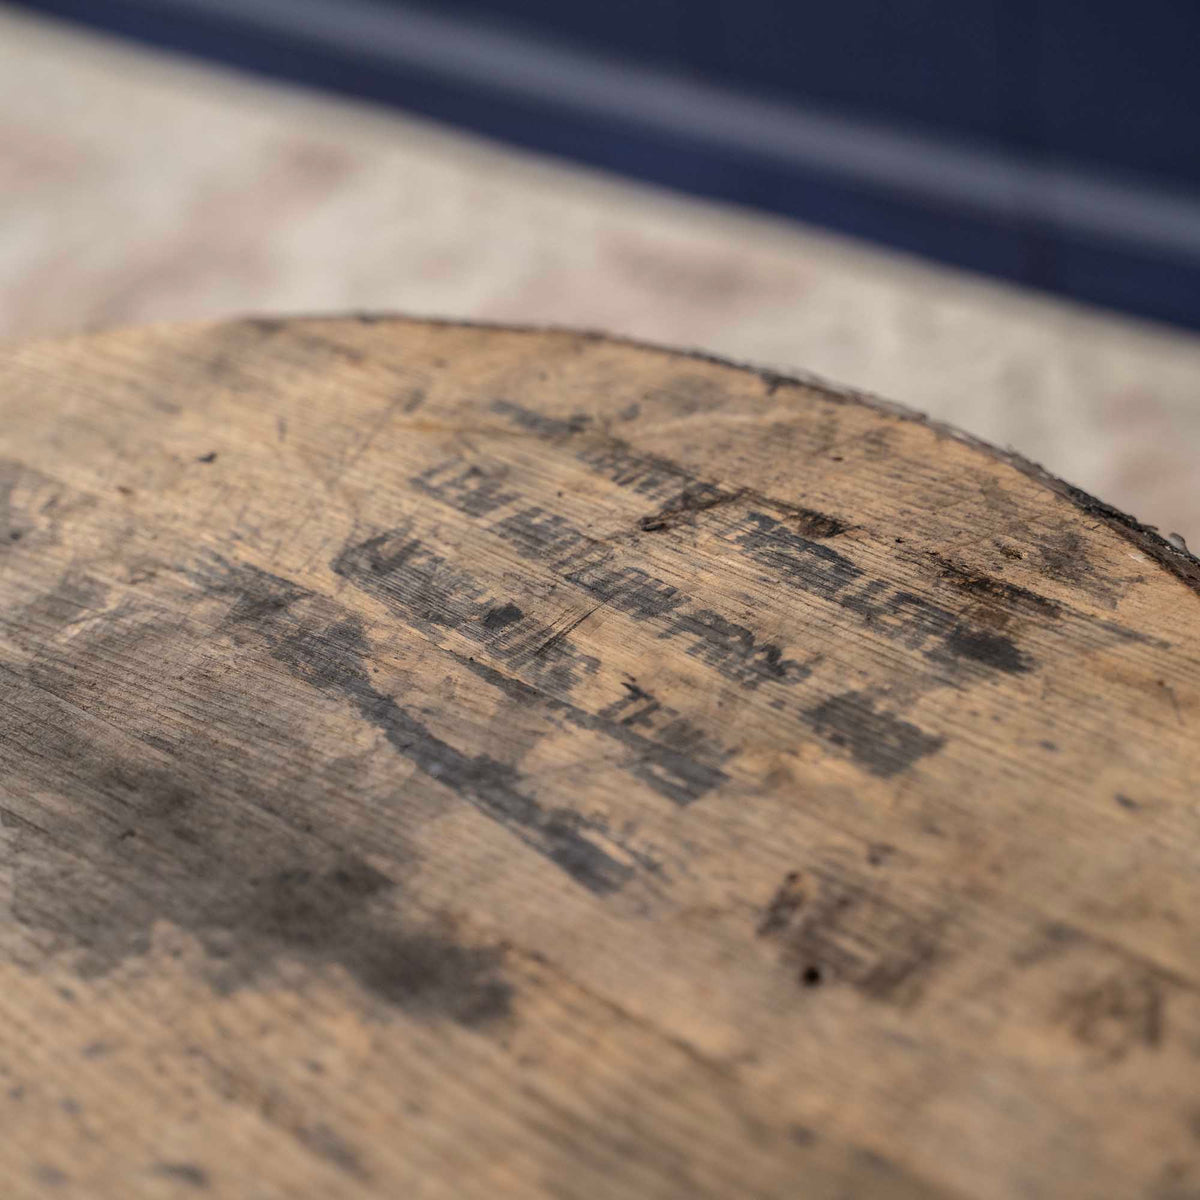 Authentic Tennessee Whiskey Barrel Head